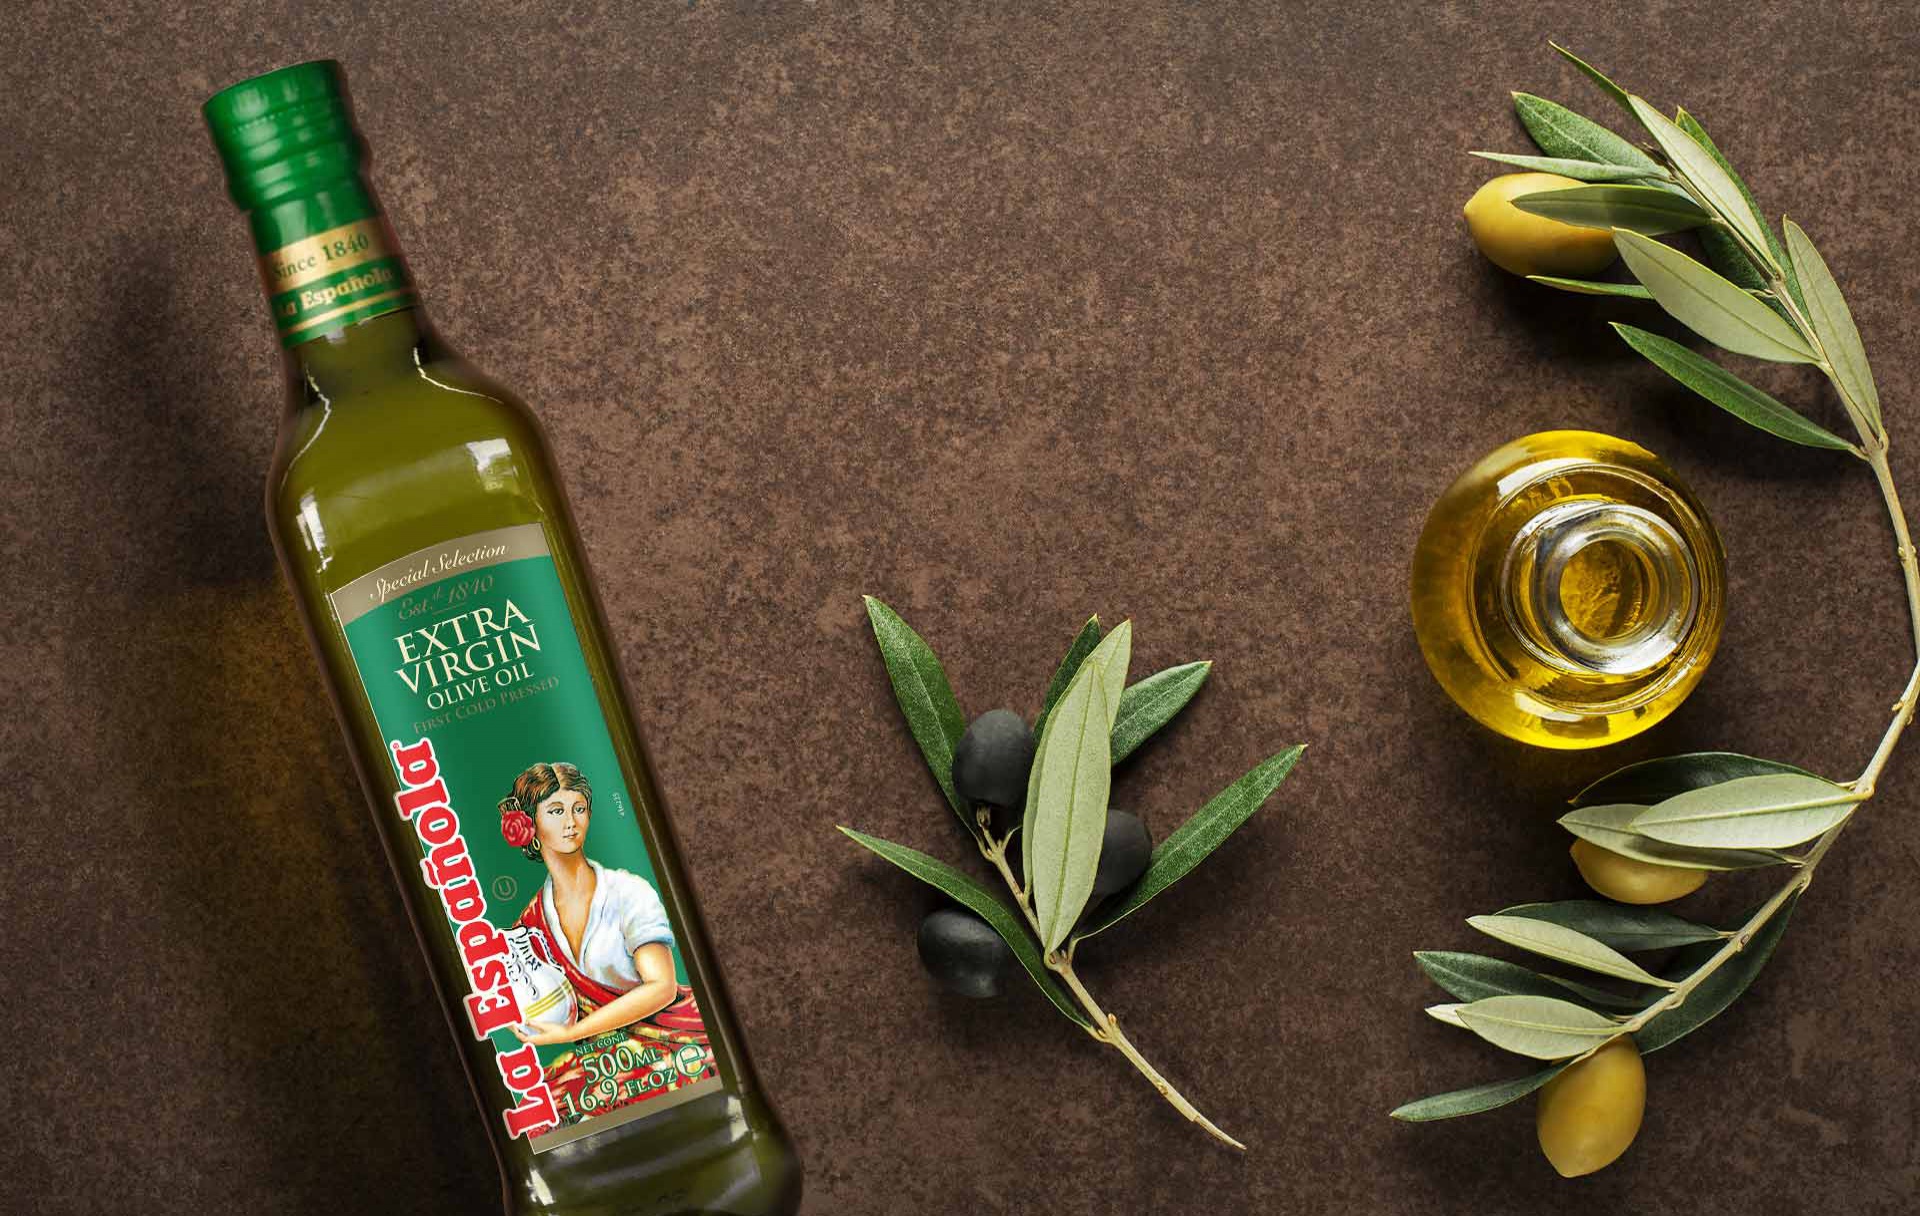 Мазь оливковое масло. Olive Oil масло оливковое. San Michele Olive Oil. Олив Ойл масло оливковое. Оливки и оливковое масло.